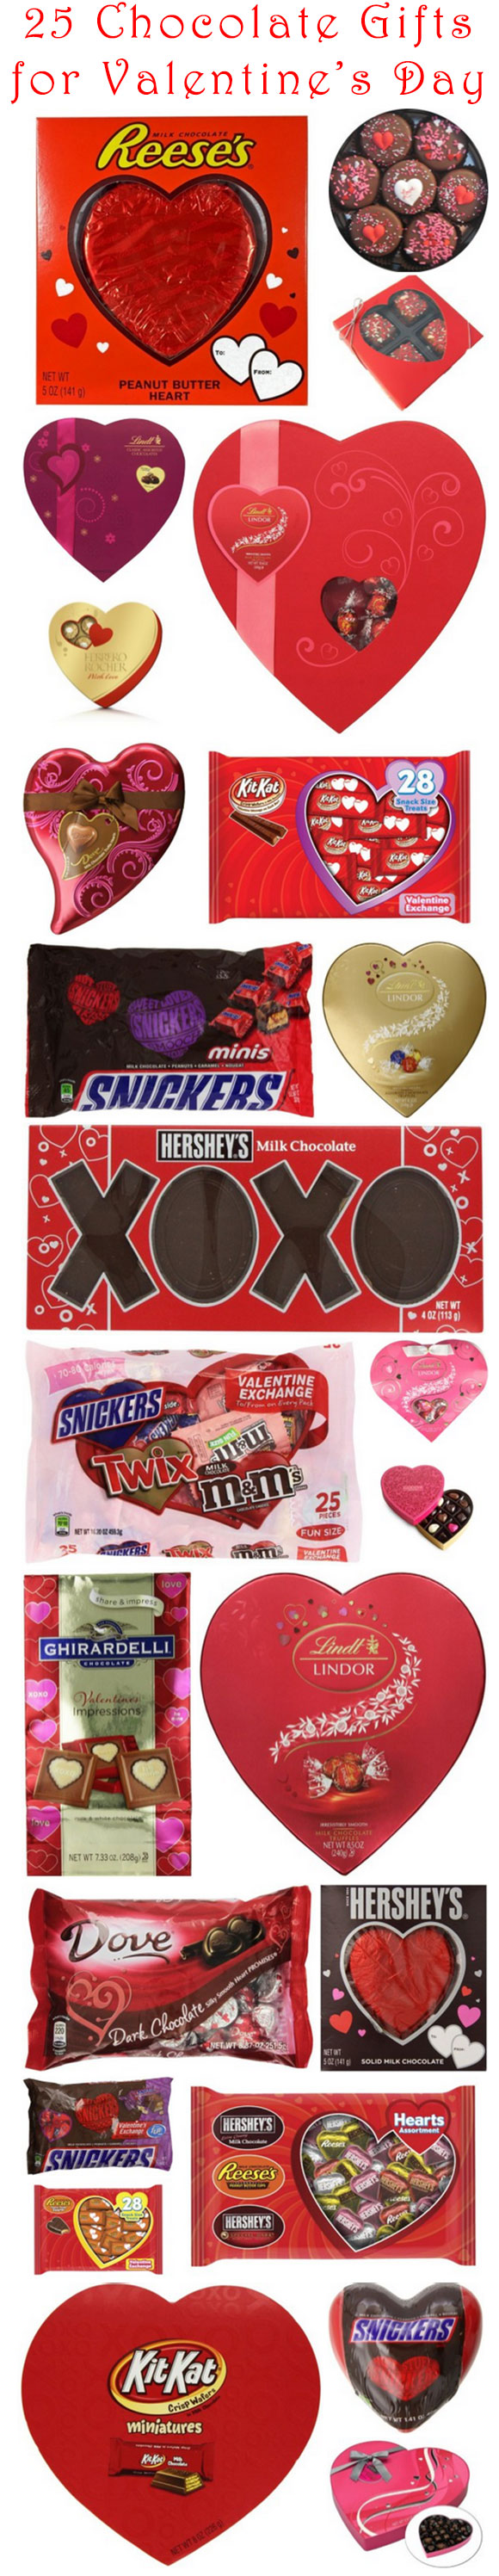 25 Chocolate Gifts to Give Your Sweetheart This Valentine’s Day